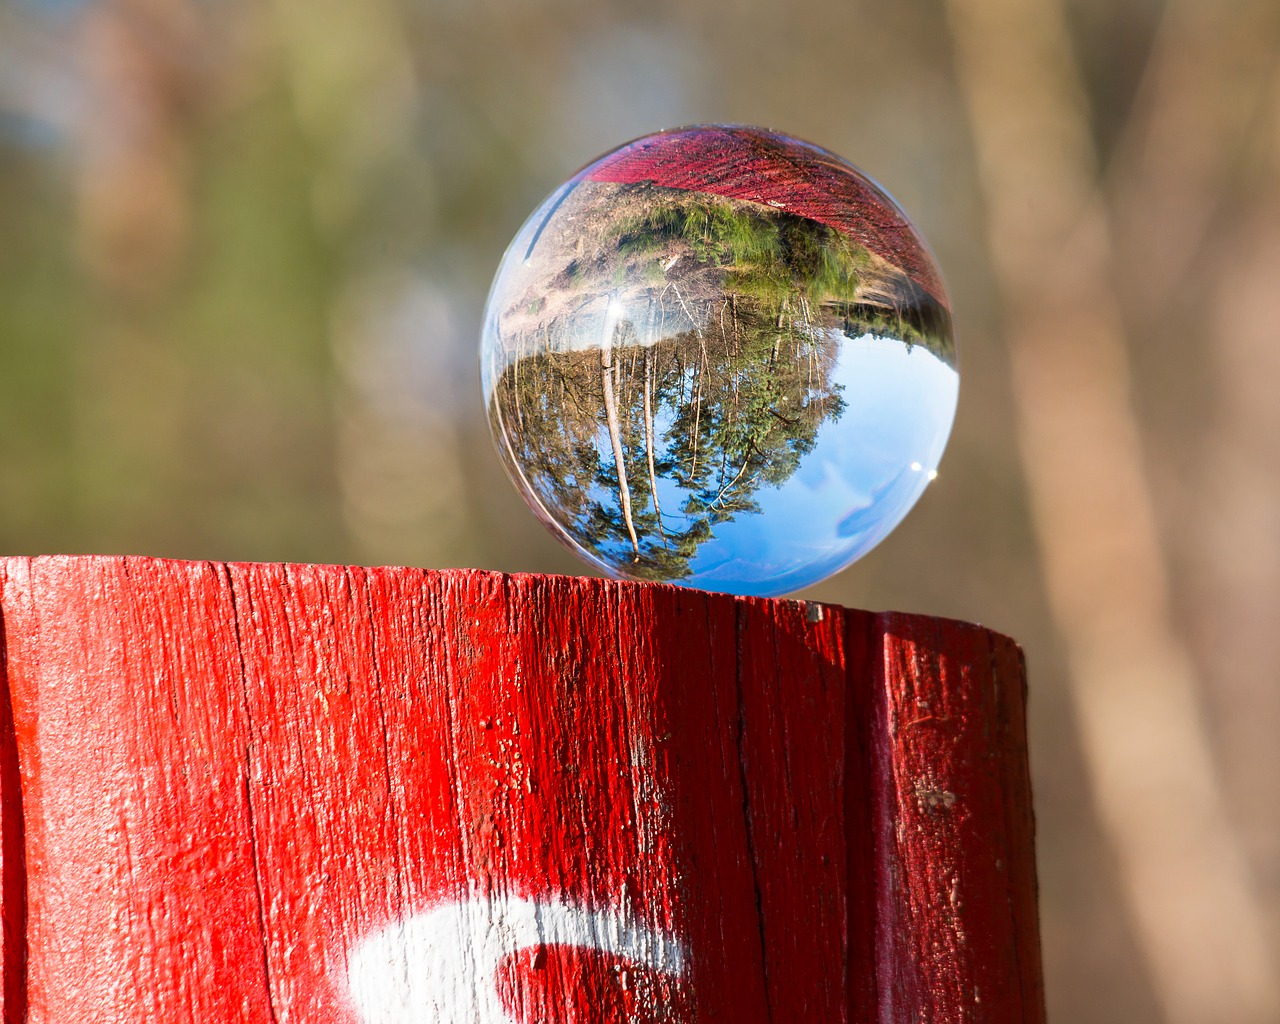 migratory character victory trail glass ball free photo